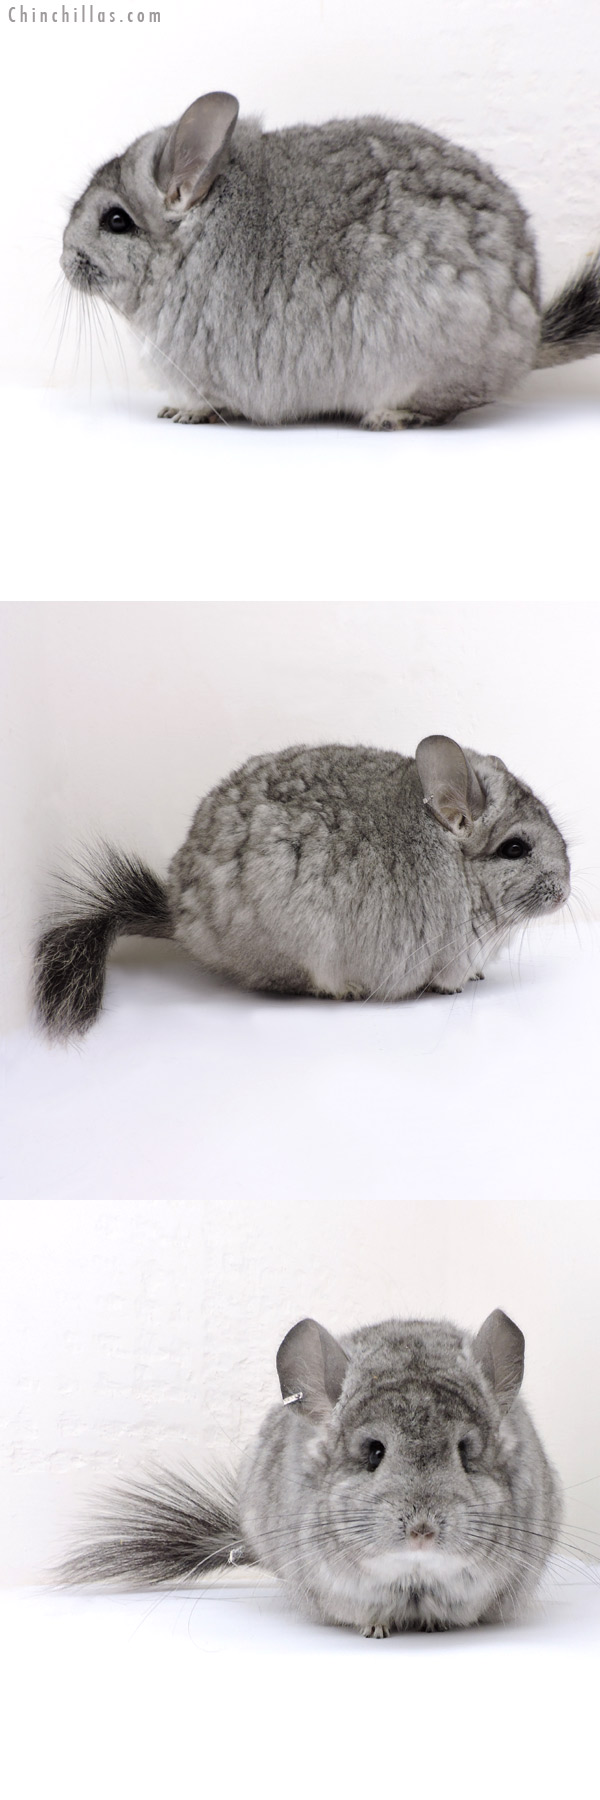 Chinchilla or related item offered for sale or export on Chinchillas.com - 18162 Exceptional Blocky Standard  Royal Persian Angora Female Chinchilla